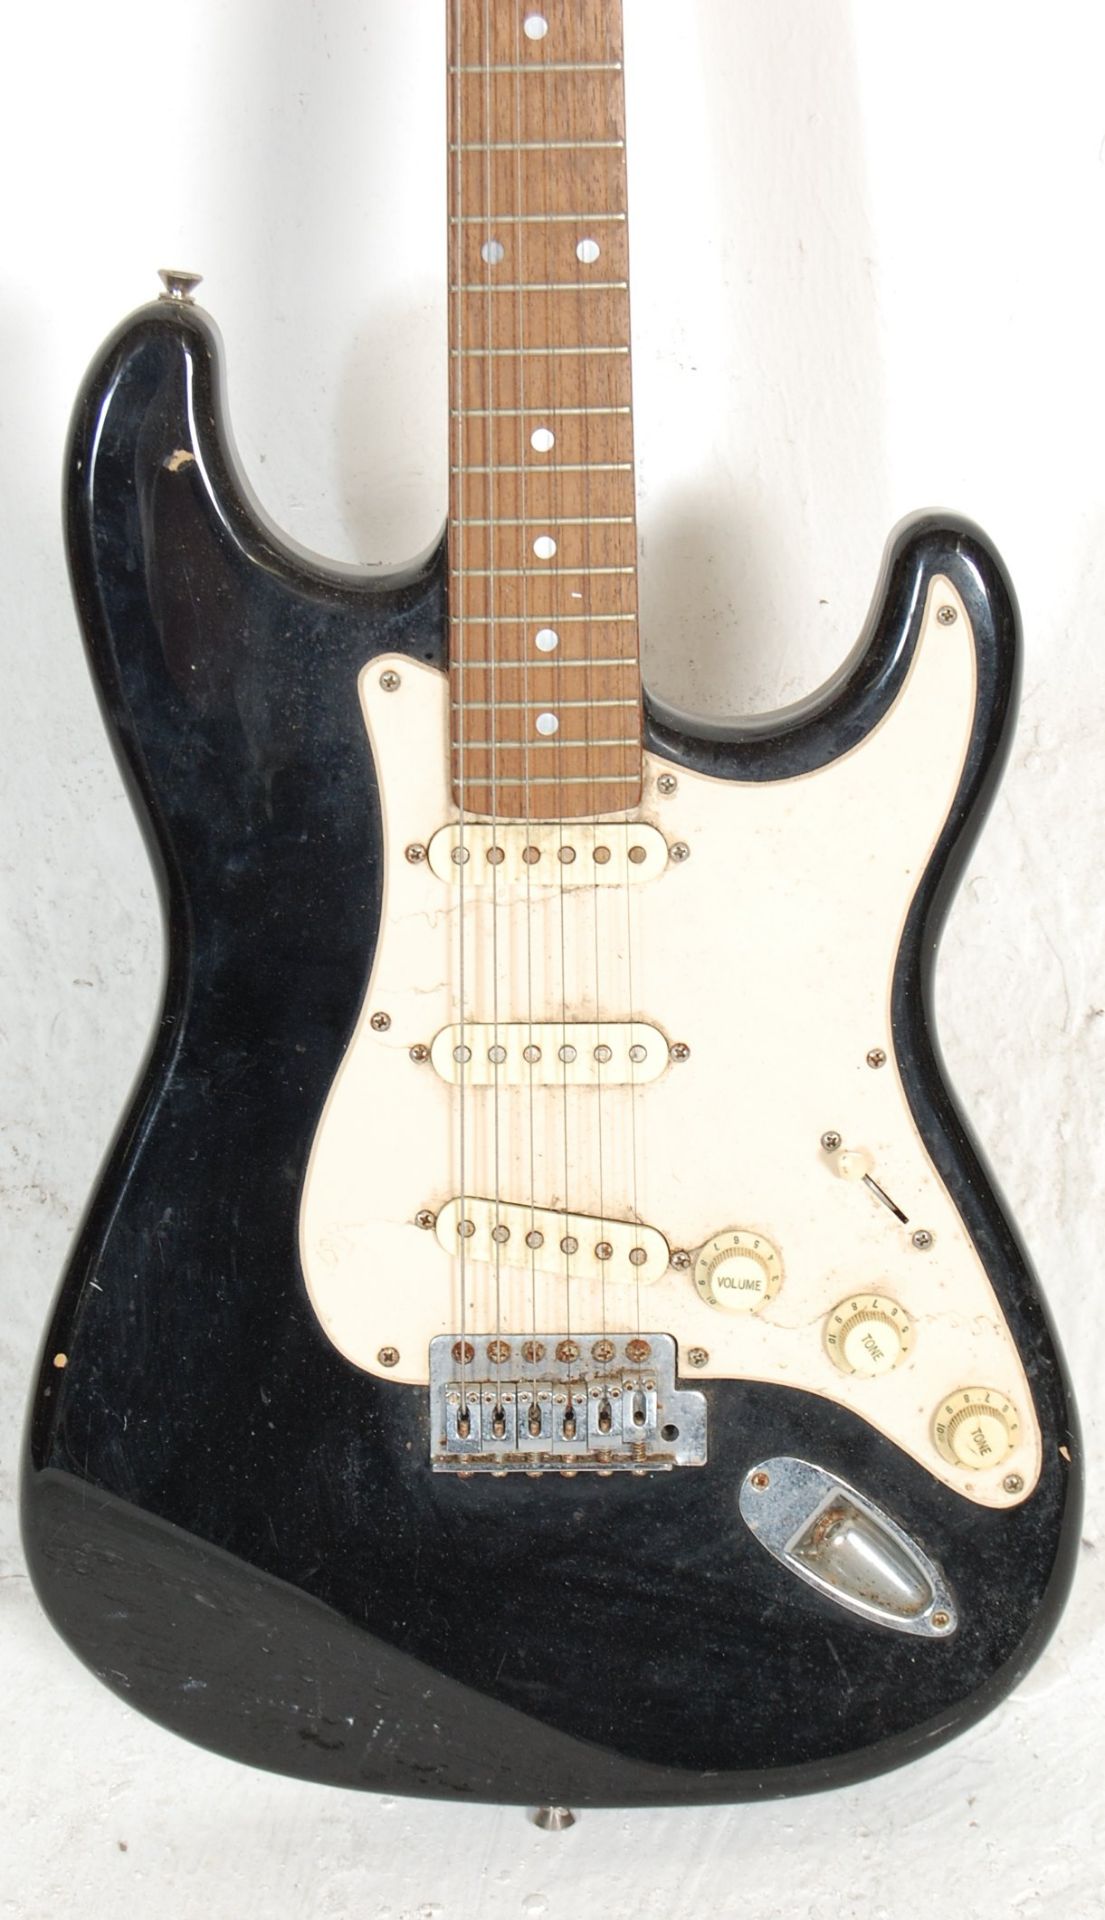 A vintage 90s Squier Strat by Fender Affinity Series Stratocaster electric guitar instrument - Image 2 of 3